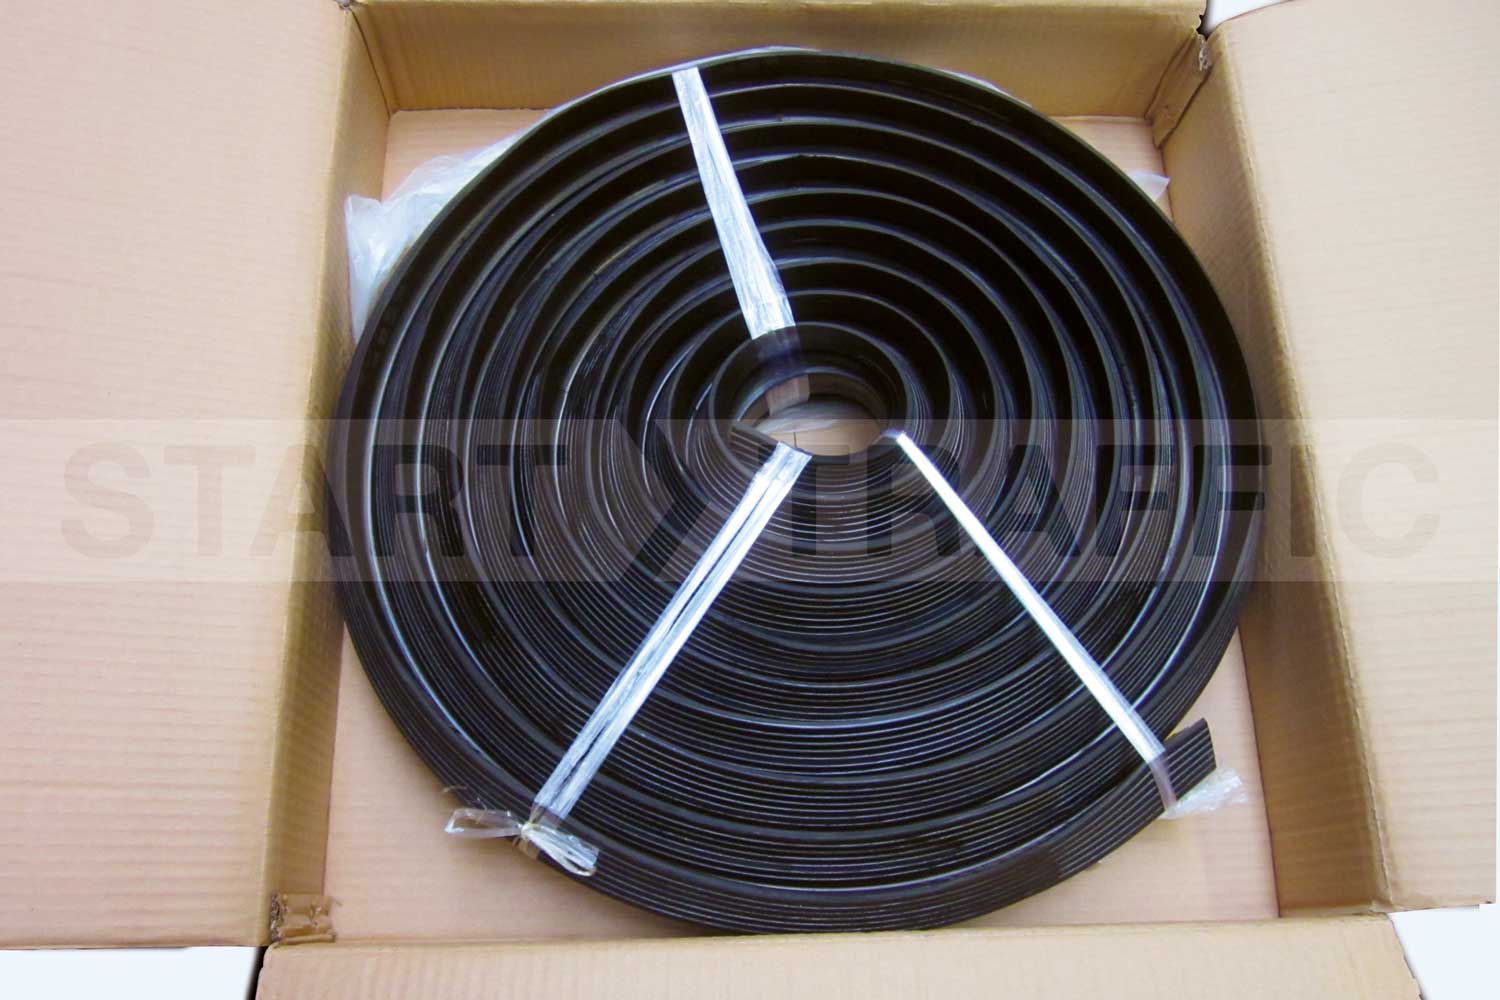 Reel of Cable Cover